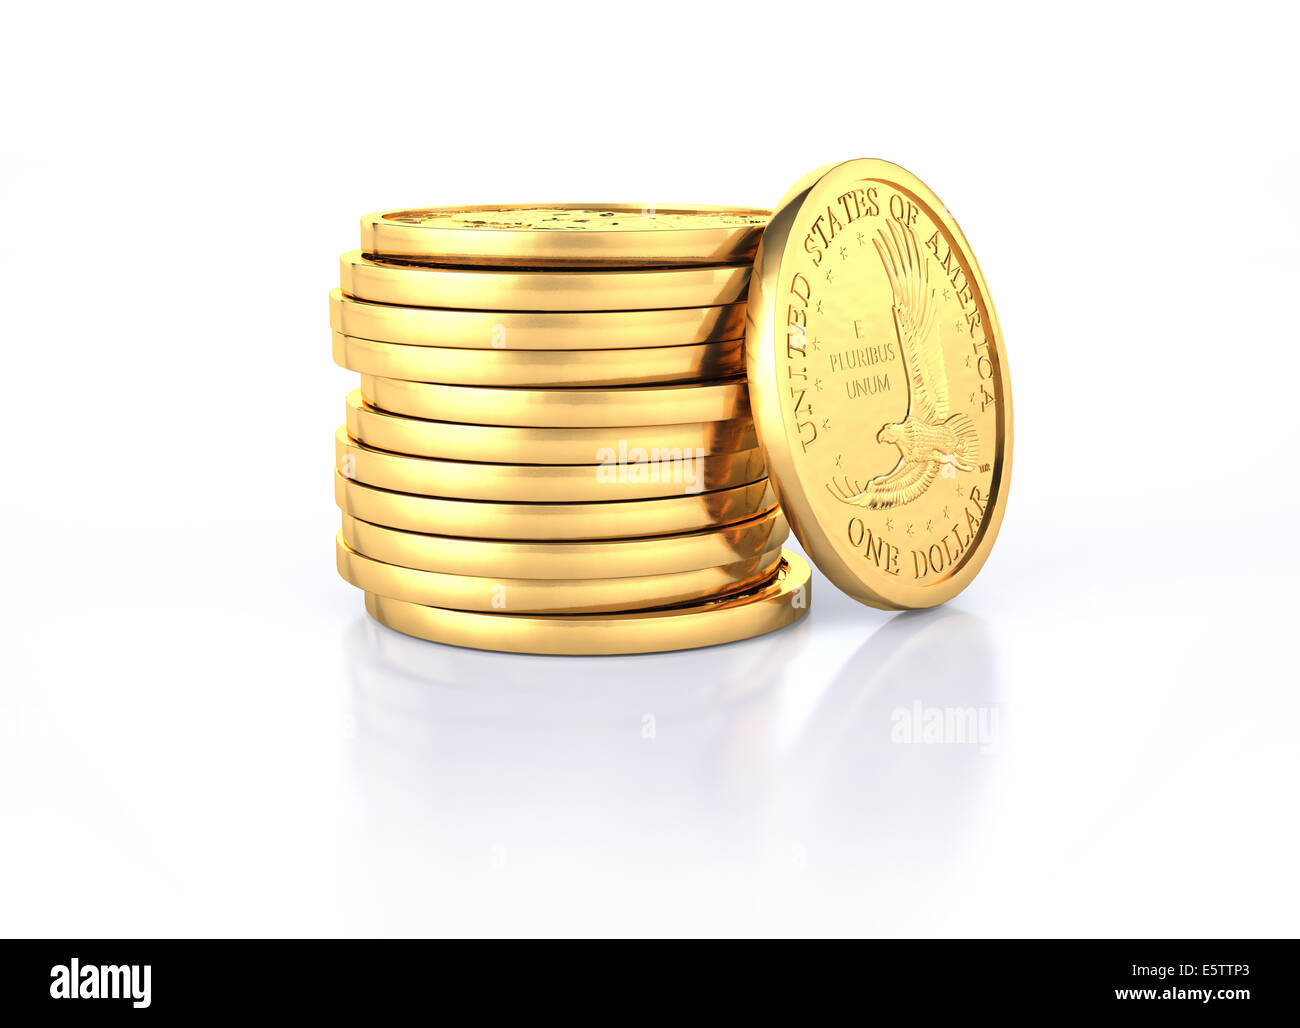 Gold dollar coins stack and one coin recumbent on it. On a white semi reflective surface and white background. Stock Photo